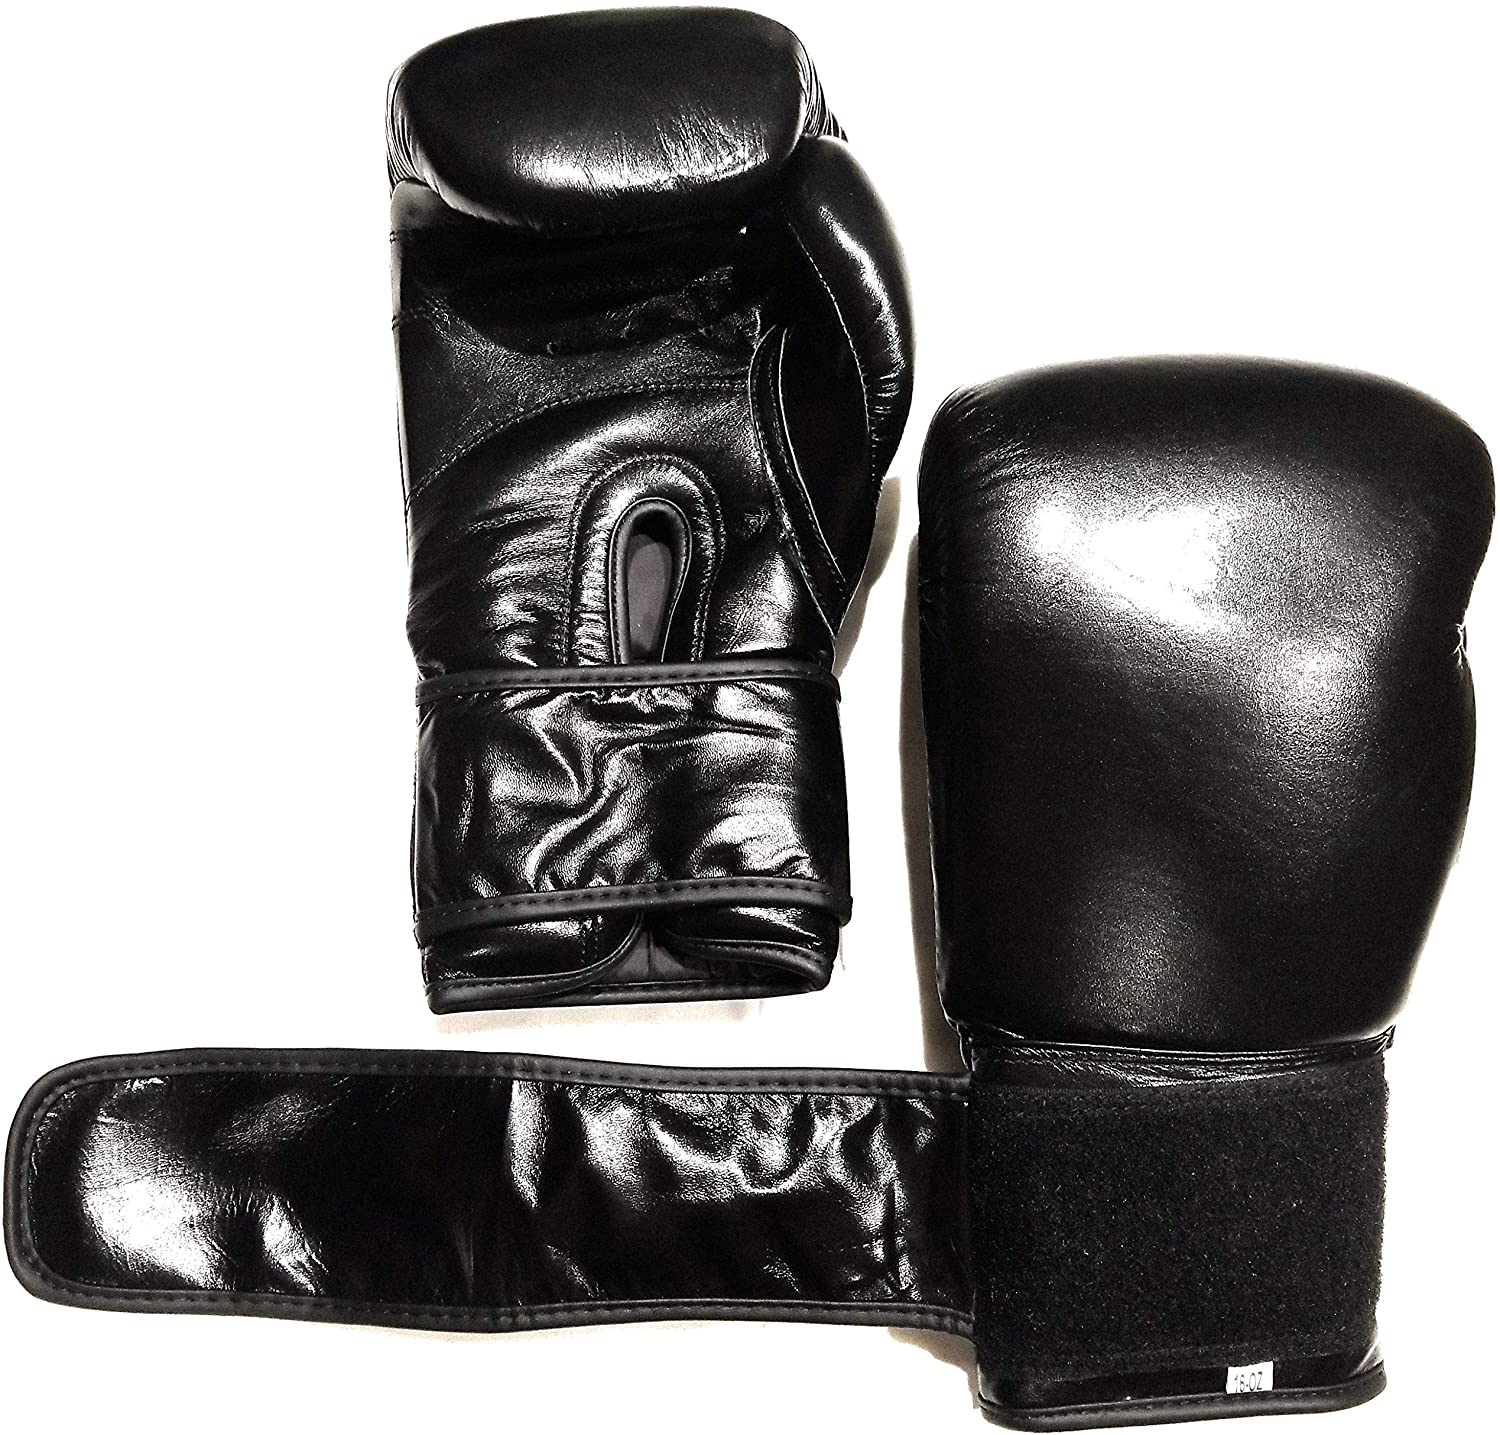 Woldorf USA High Quality Leather Boxing Gloves Training Sparring Fighting 